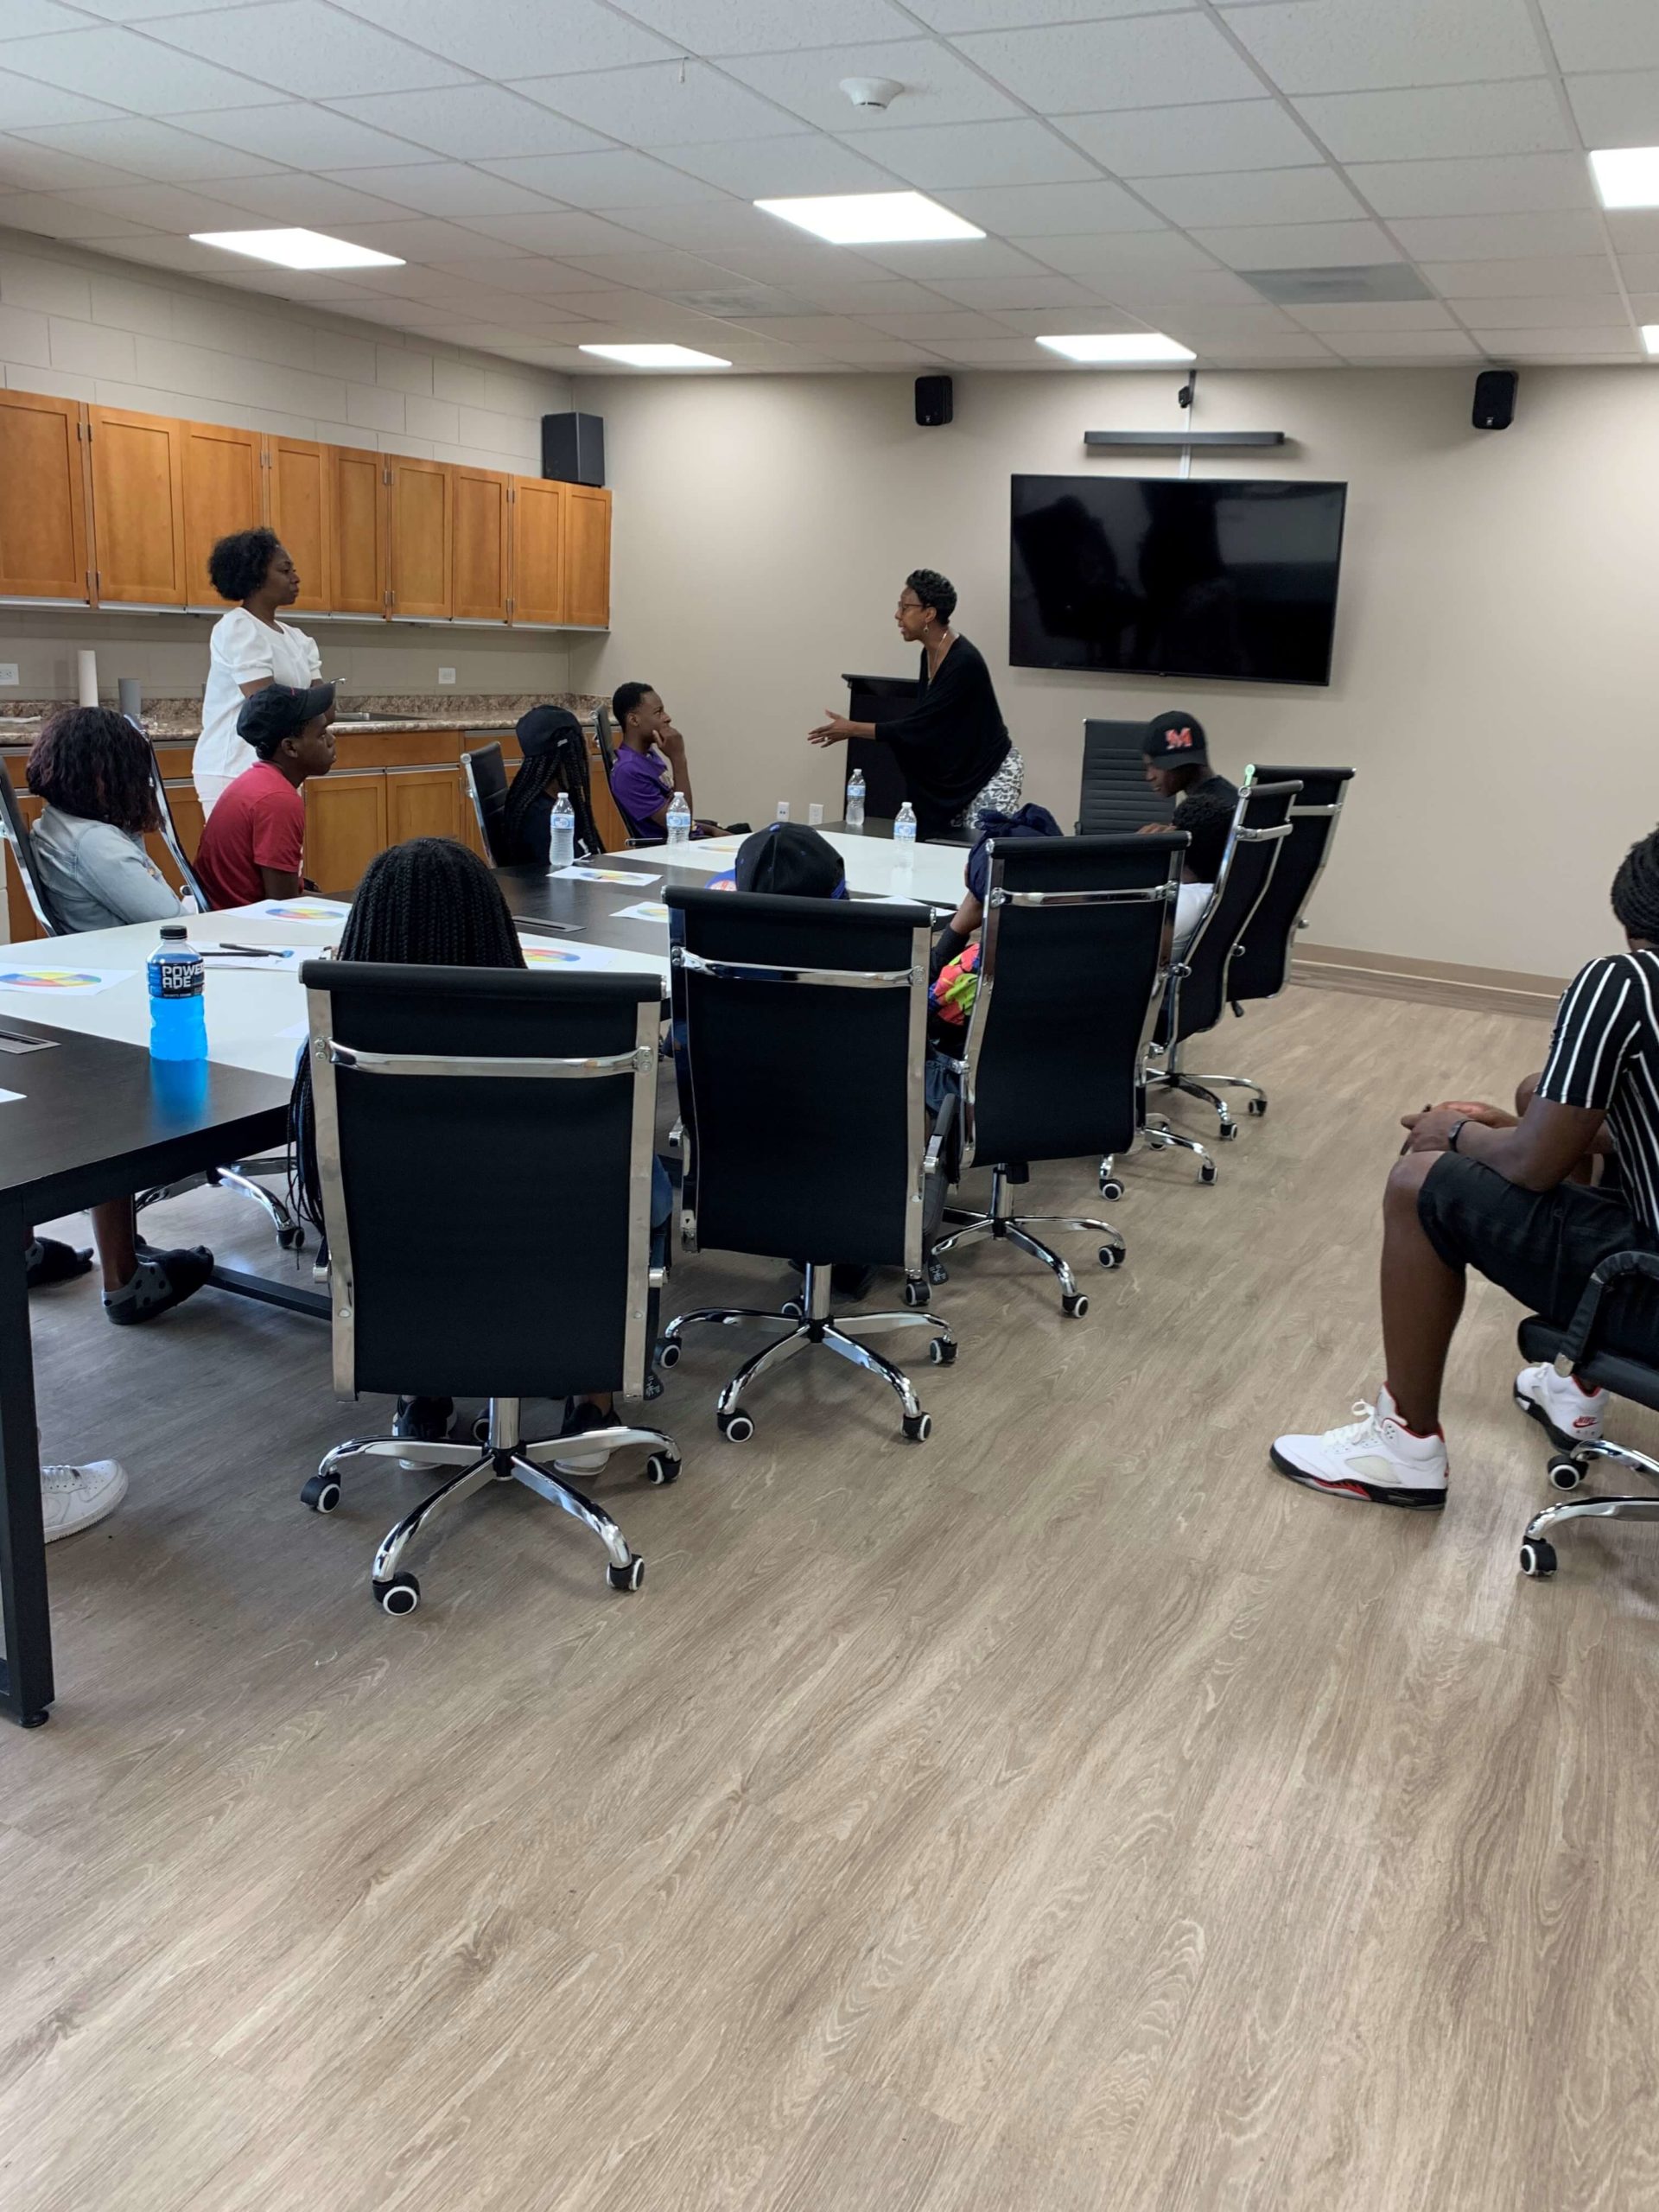 Judge Colvin offers insight and encouragement to children attending the AfterZone Camp at Booker T. Washington Center in the Pleasant Hill neighborhood.